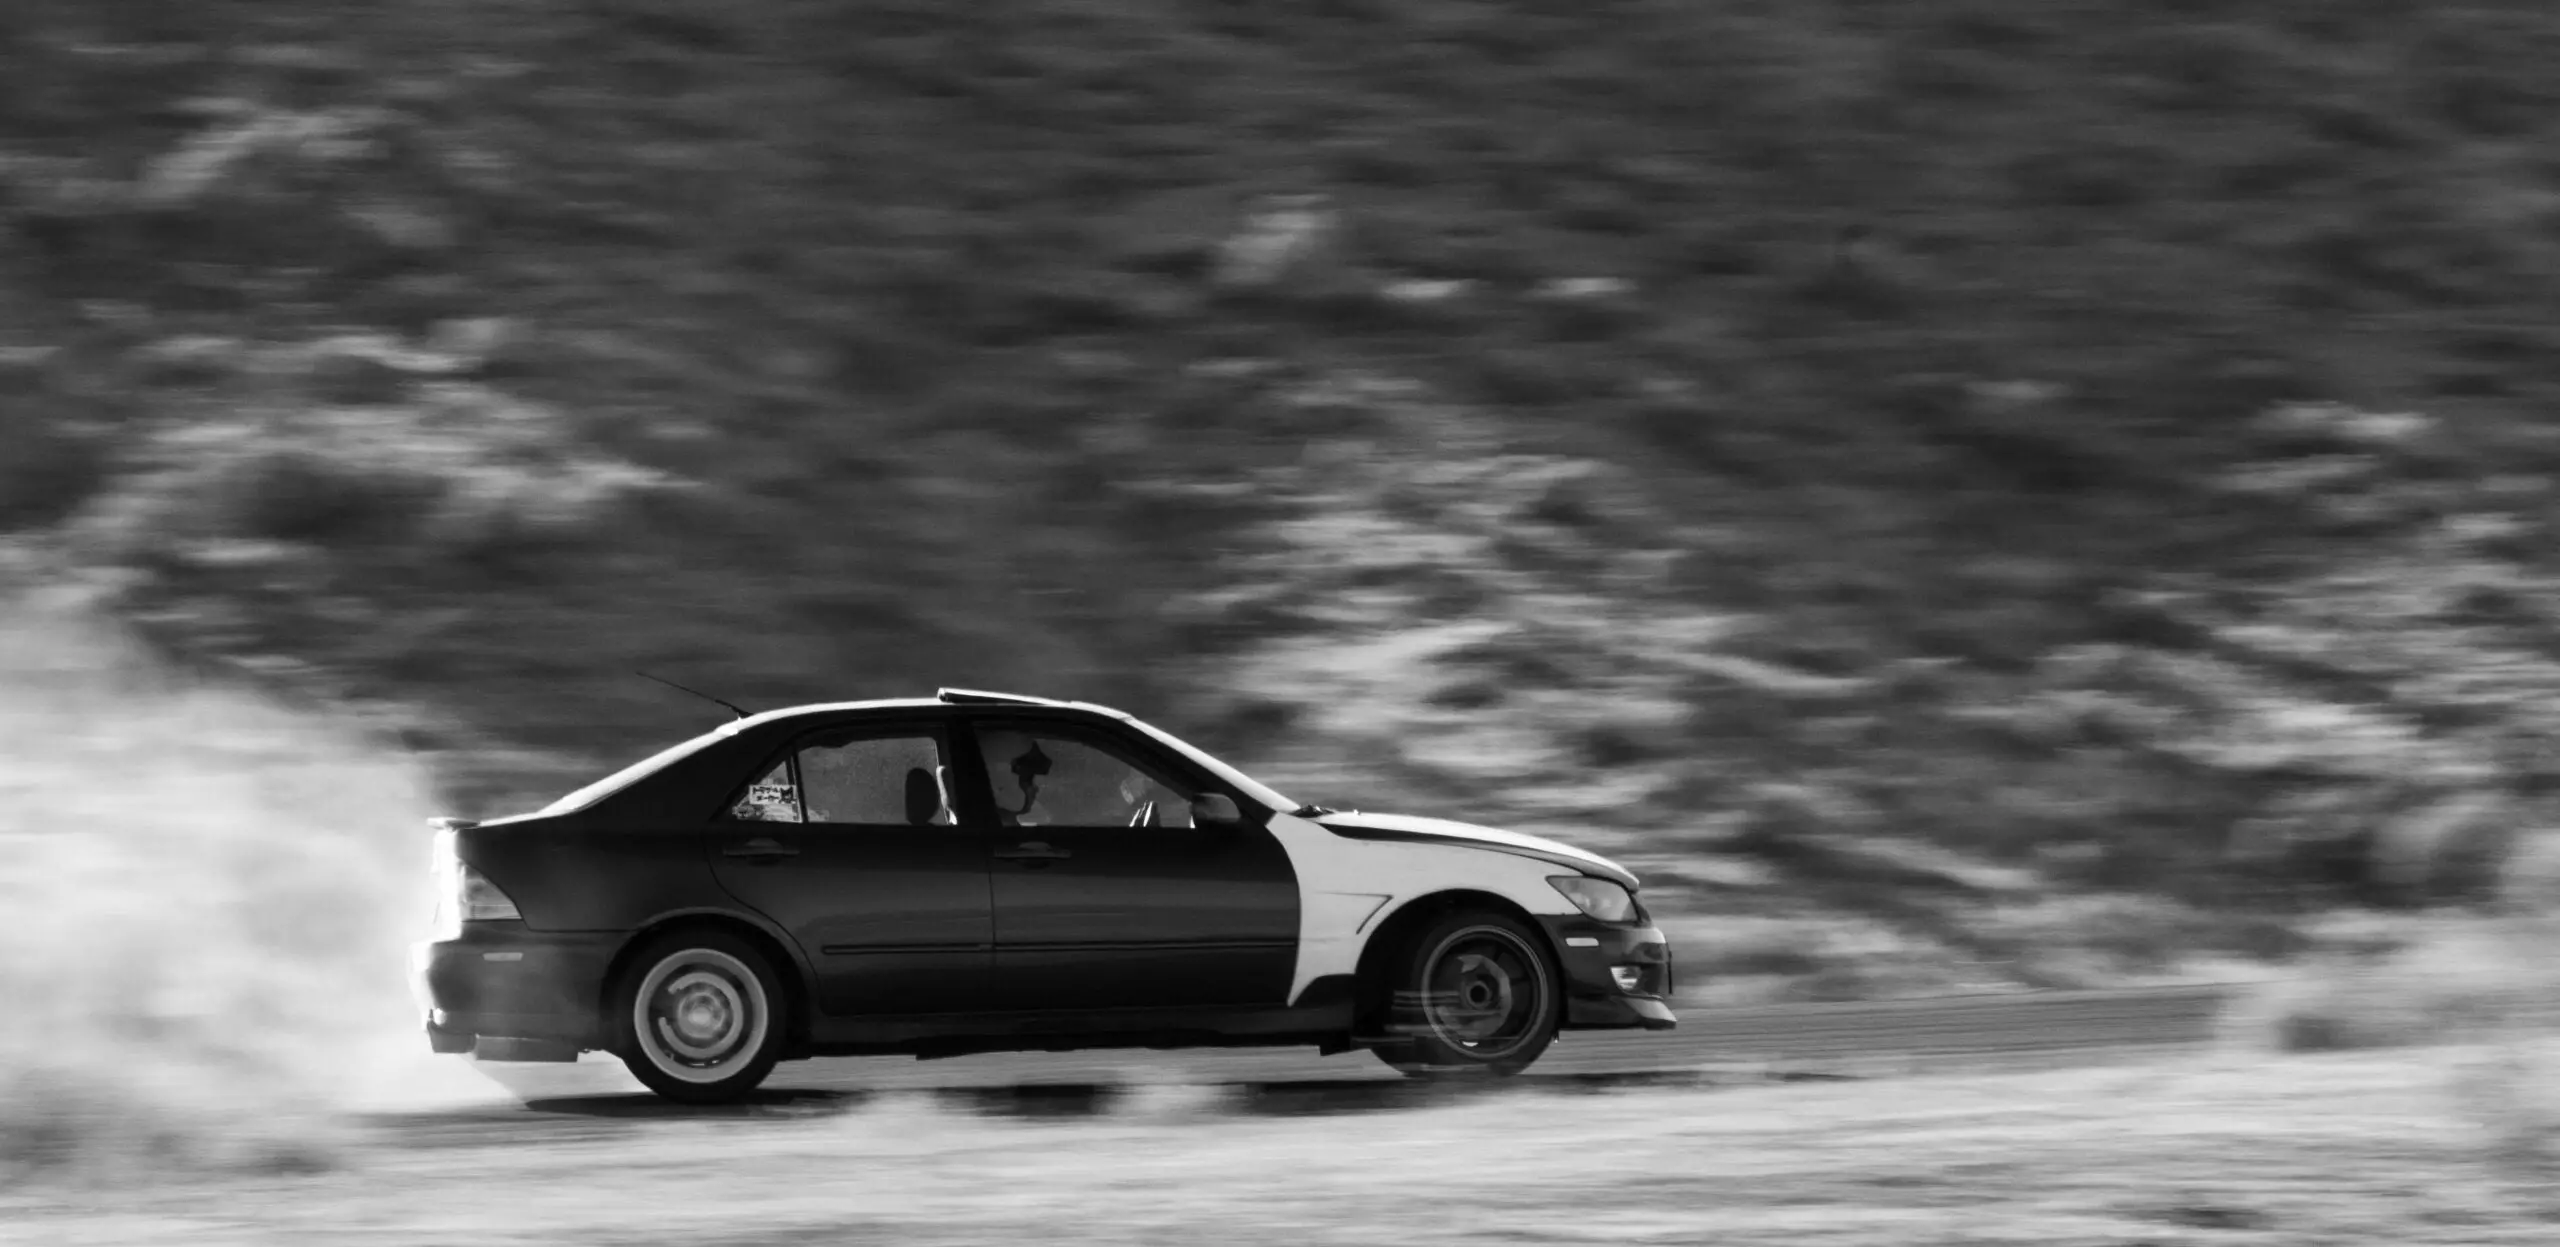 The Only Way This Drifting Lexus IS300 Could Be Better Is by Being a SportCross | Autance